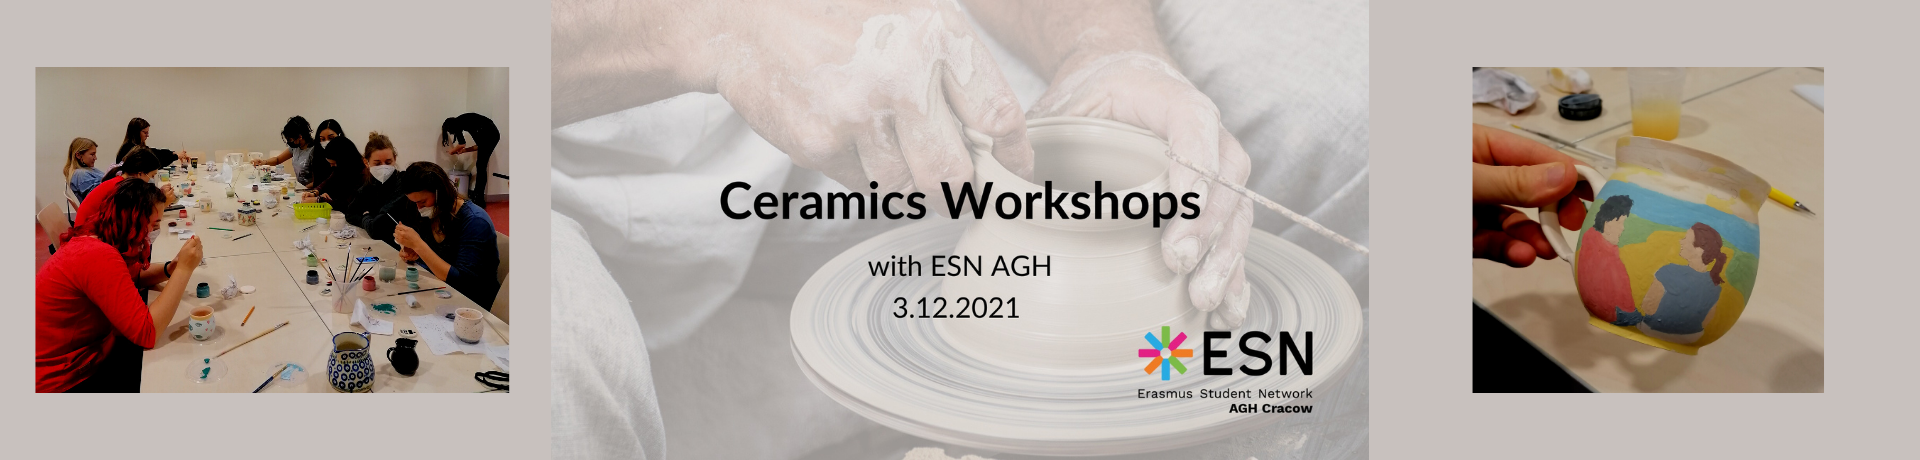 Ceramics Workshops with ESN AGH